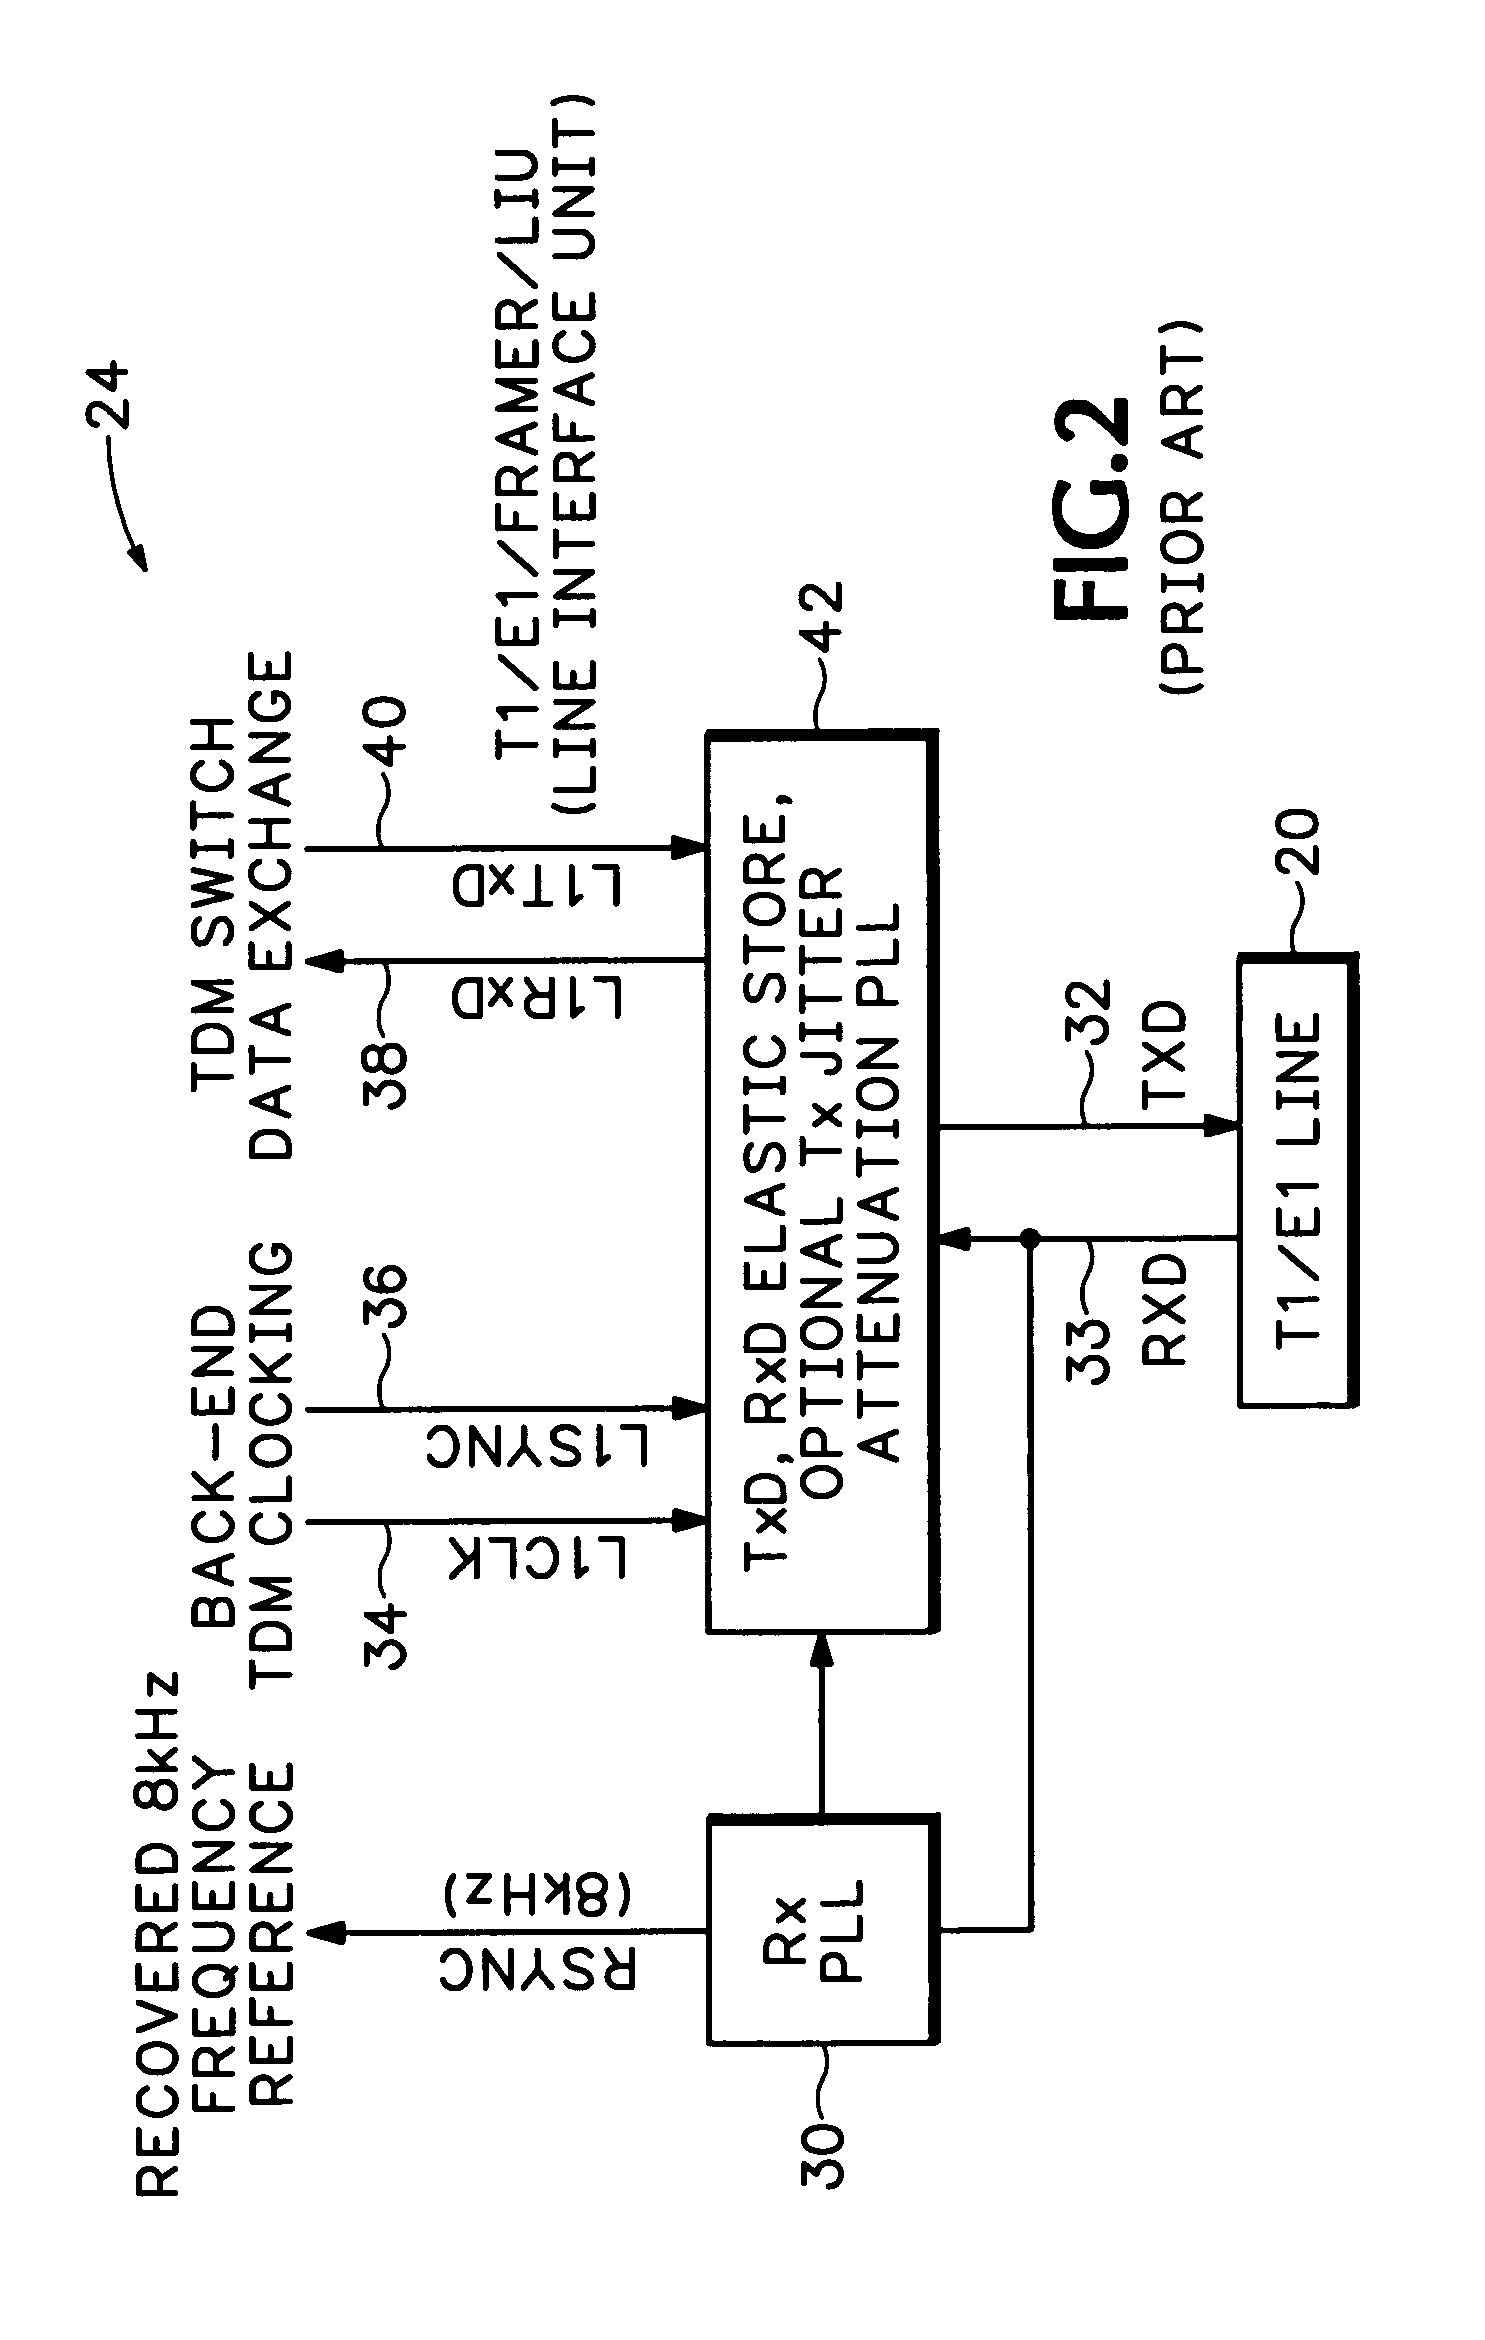 Method and apparatus for testing synchronization circuitry